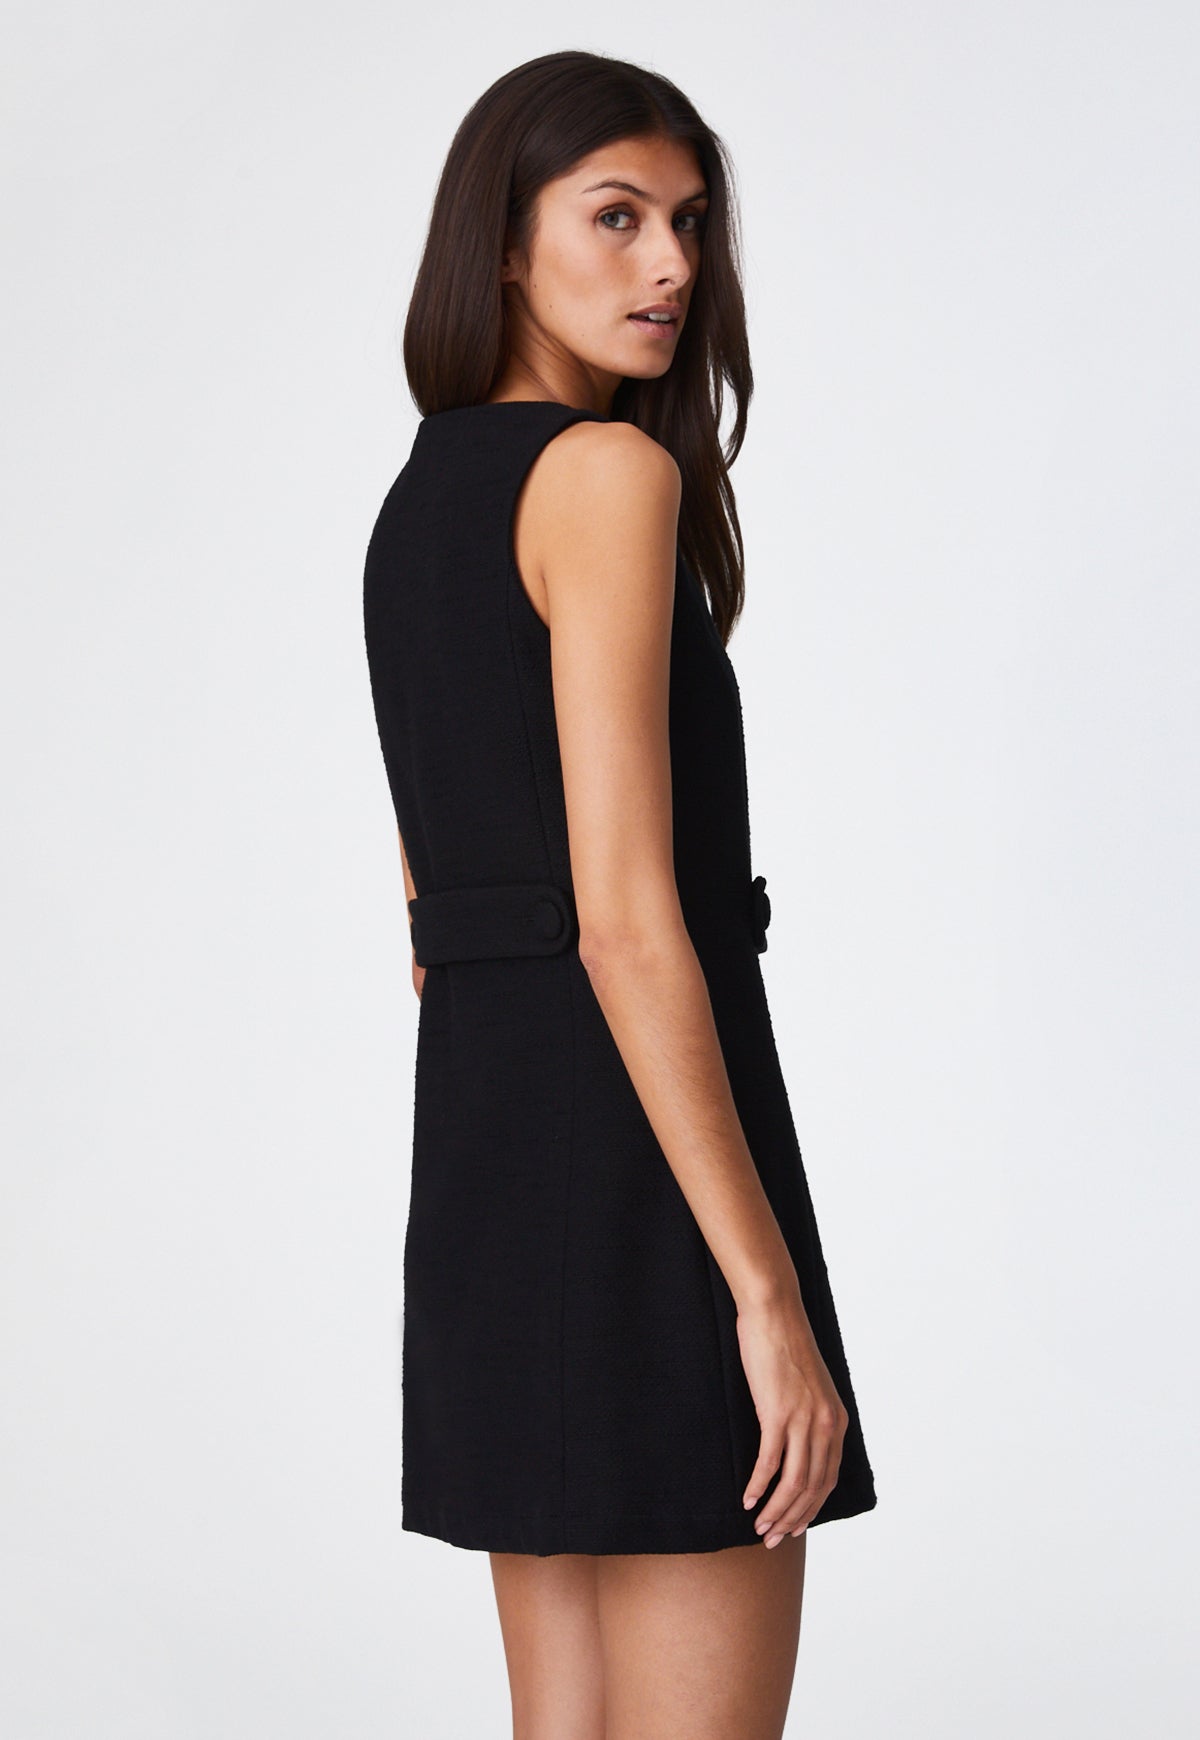 THE SLEEVELESS BELTED MINI DRESS in BLACK TEXTURED COTTON